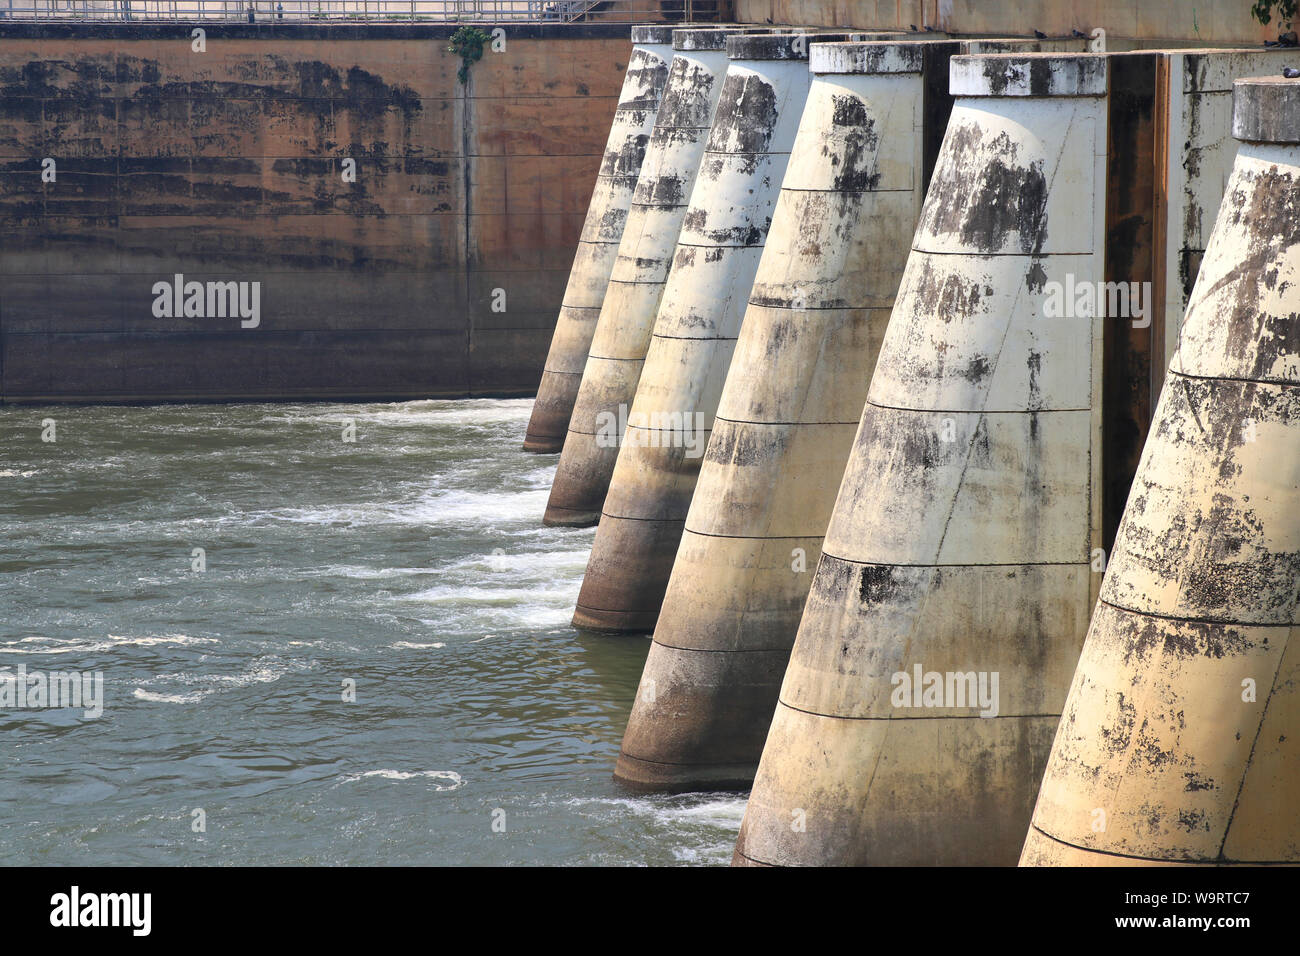 Dams are released for agriculture. Watergate and discharge. Dam for controlling water management. Stock Photo